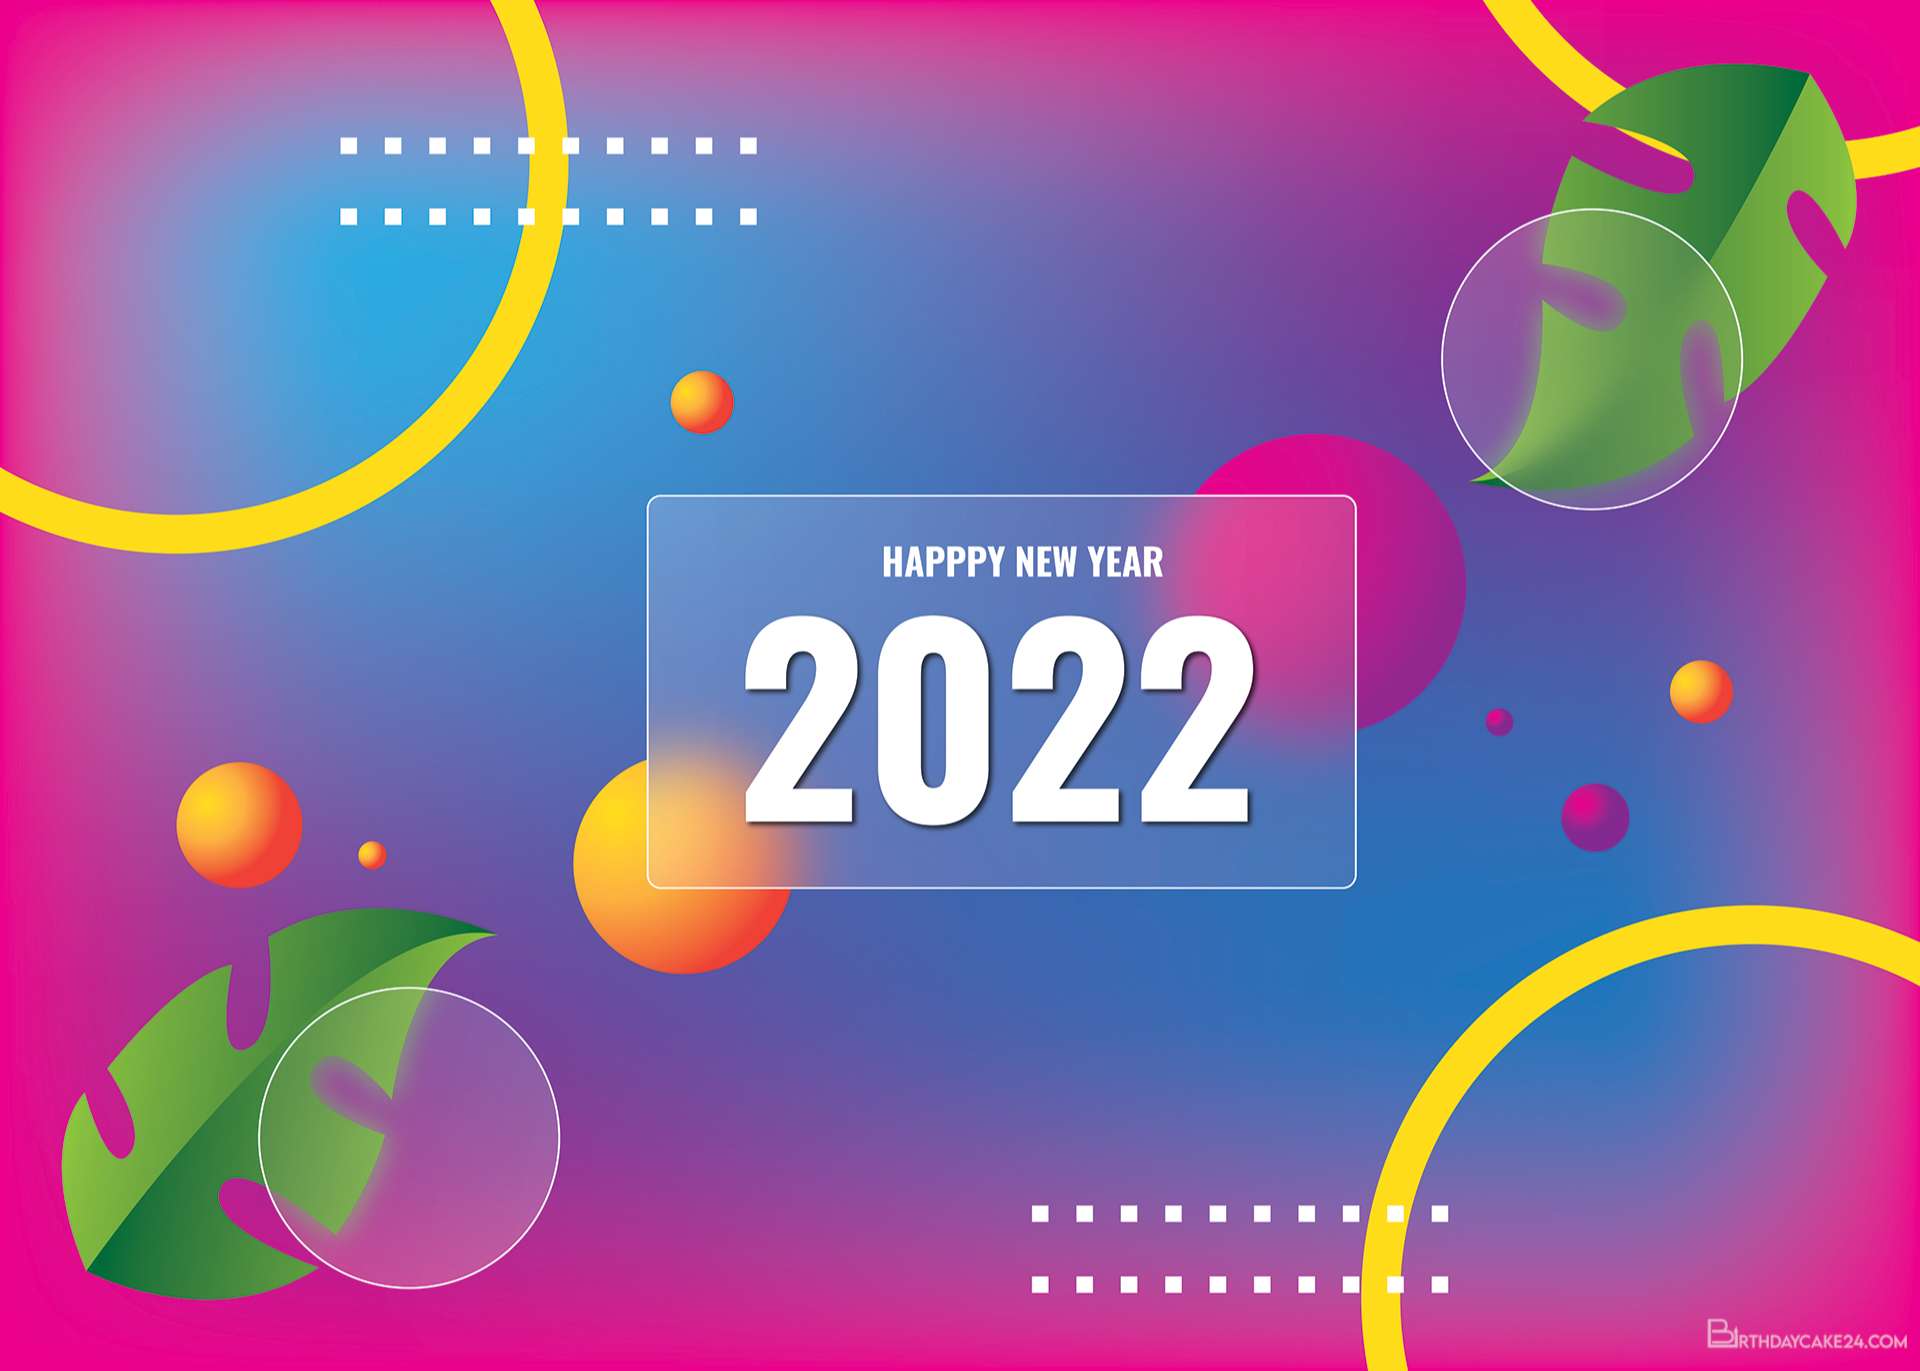 Free Background Happy New Year 2022 Wallpaper HD for Desktop